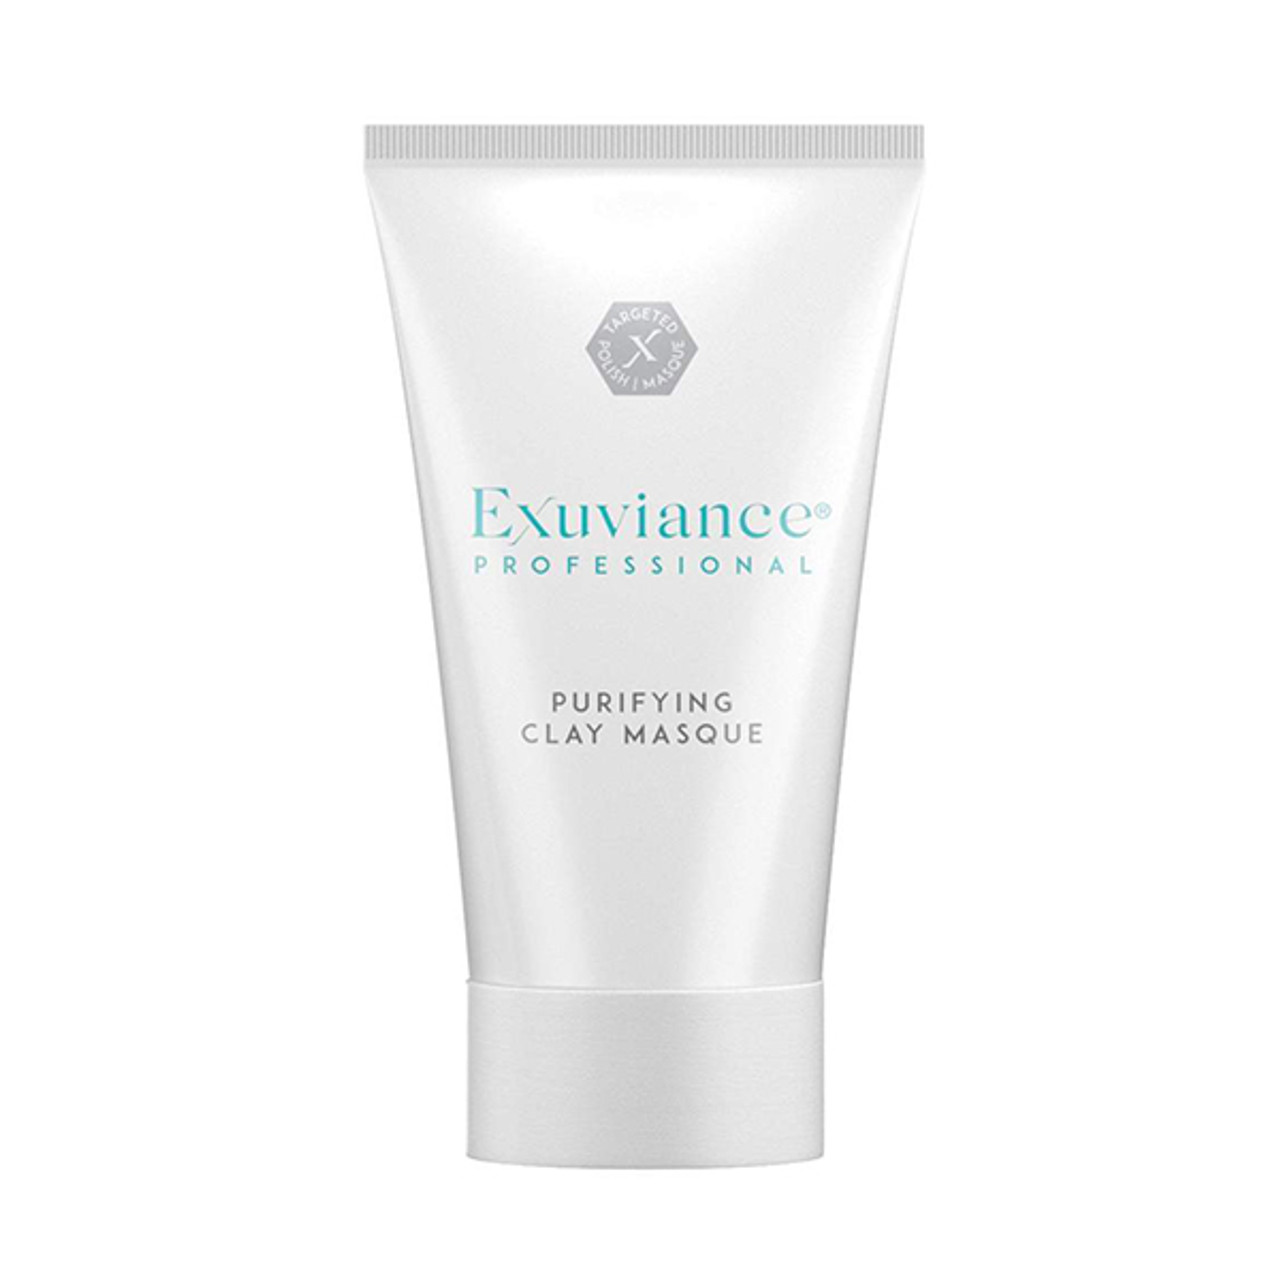 Exuviance Professional Purifying Clay Masque - 1.7 oz